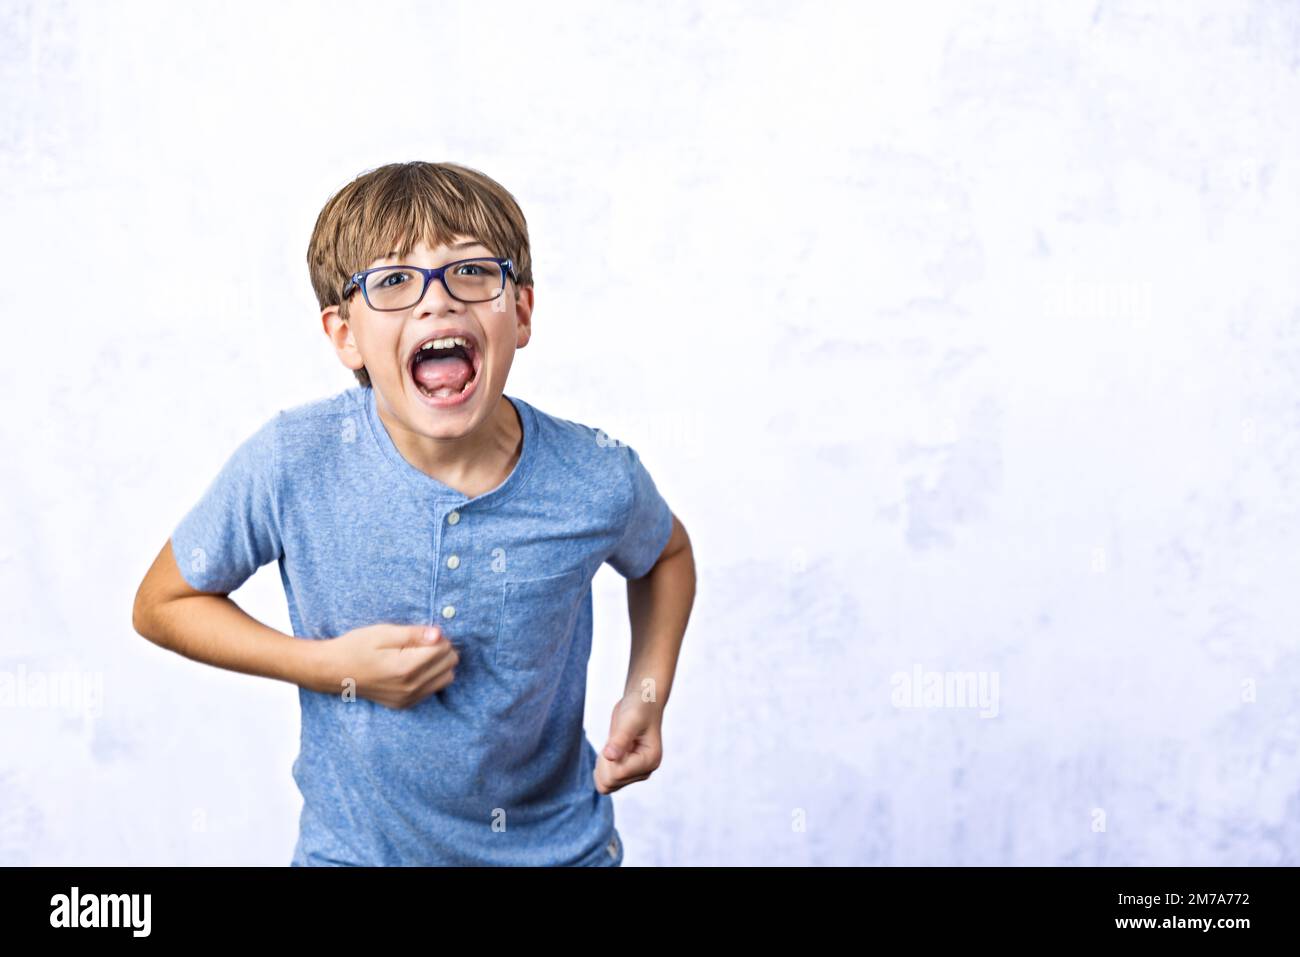 A pre-teen tween boy with glasses with his mouth open and running away on a white background with copy space Stock Photo